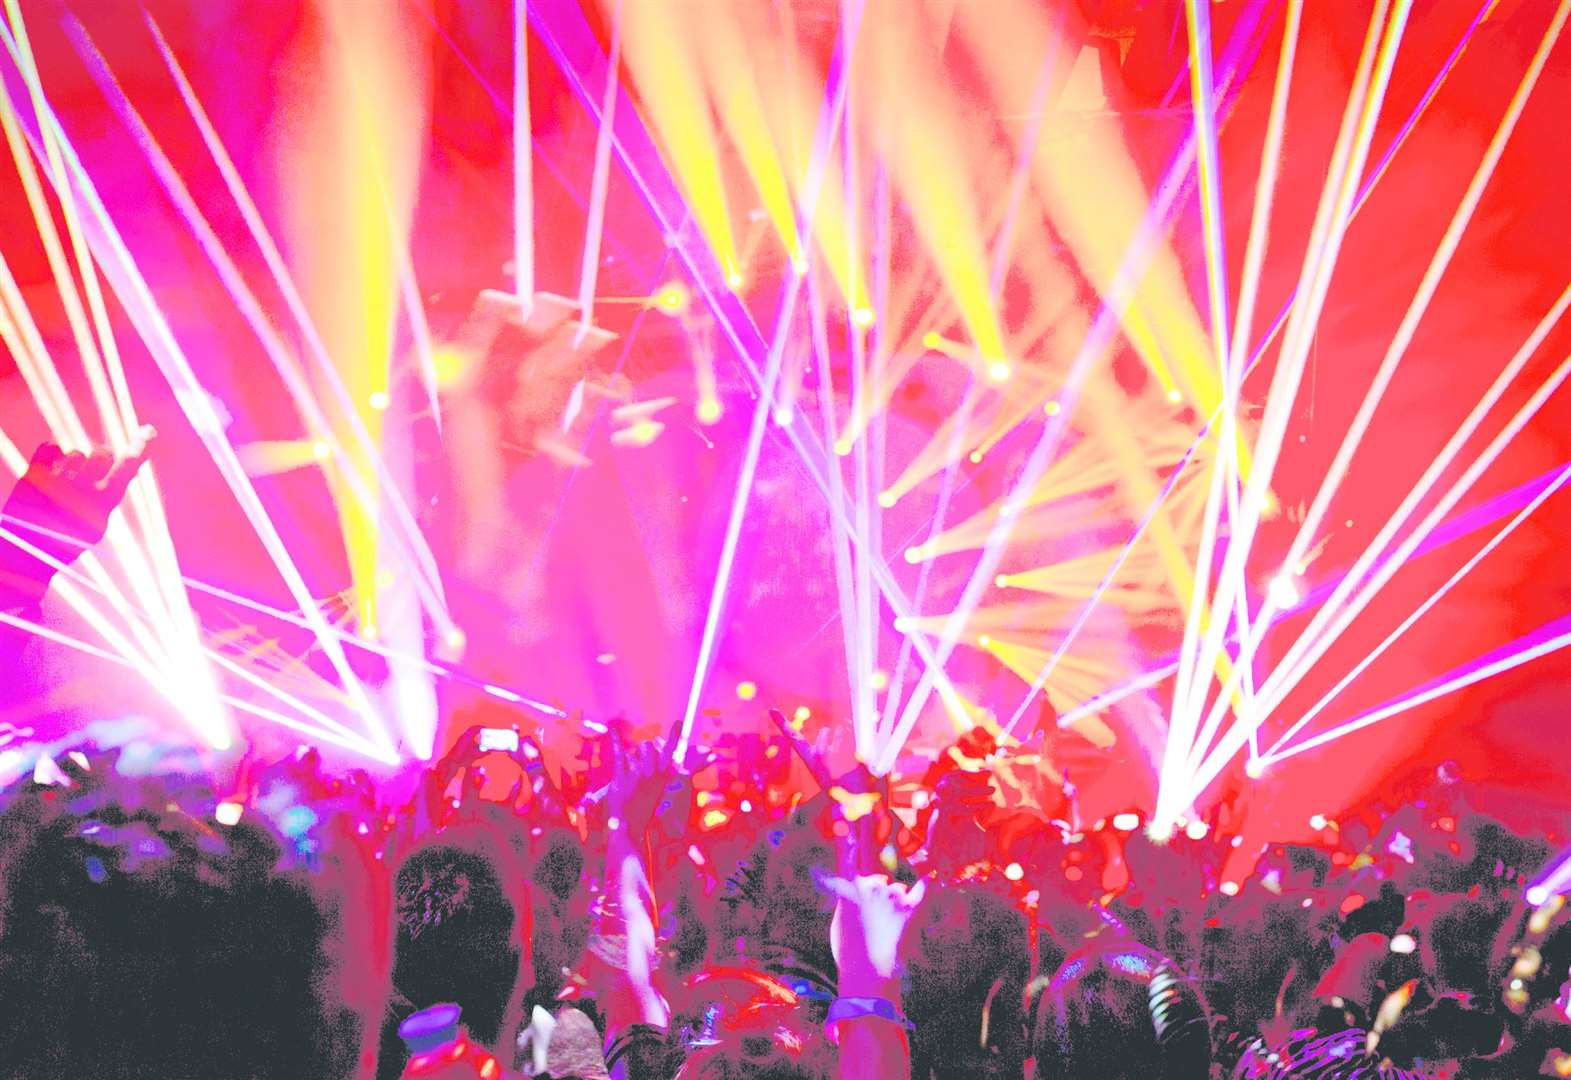 At its peak there were more than 20 raves being held across the county each weekend